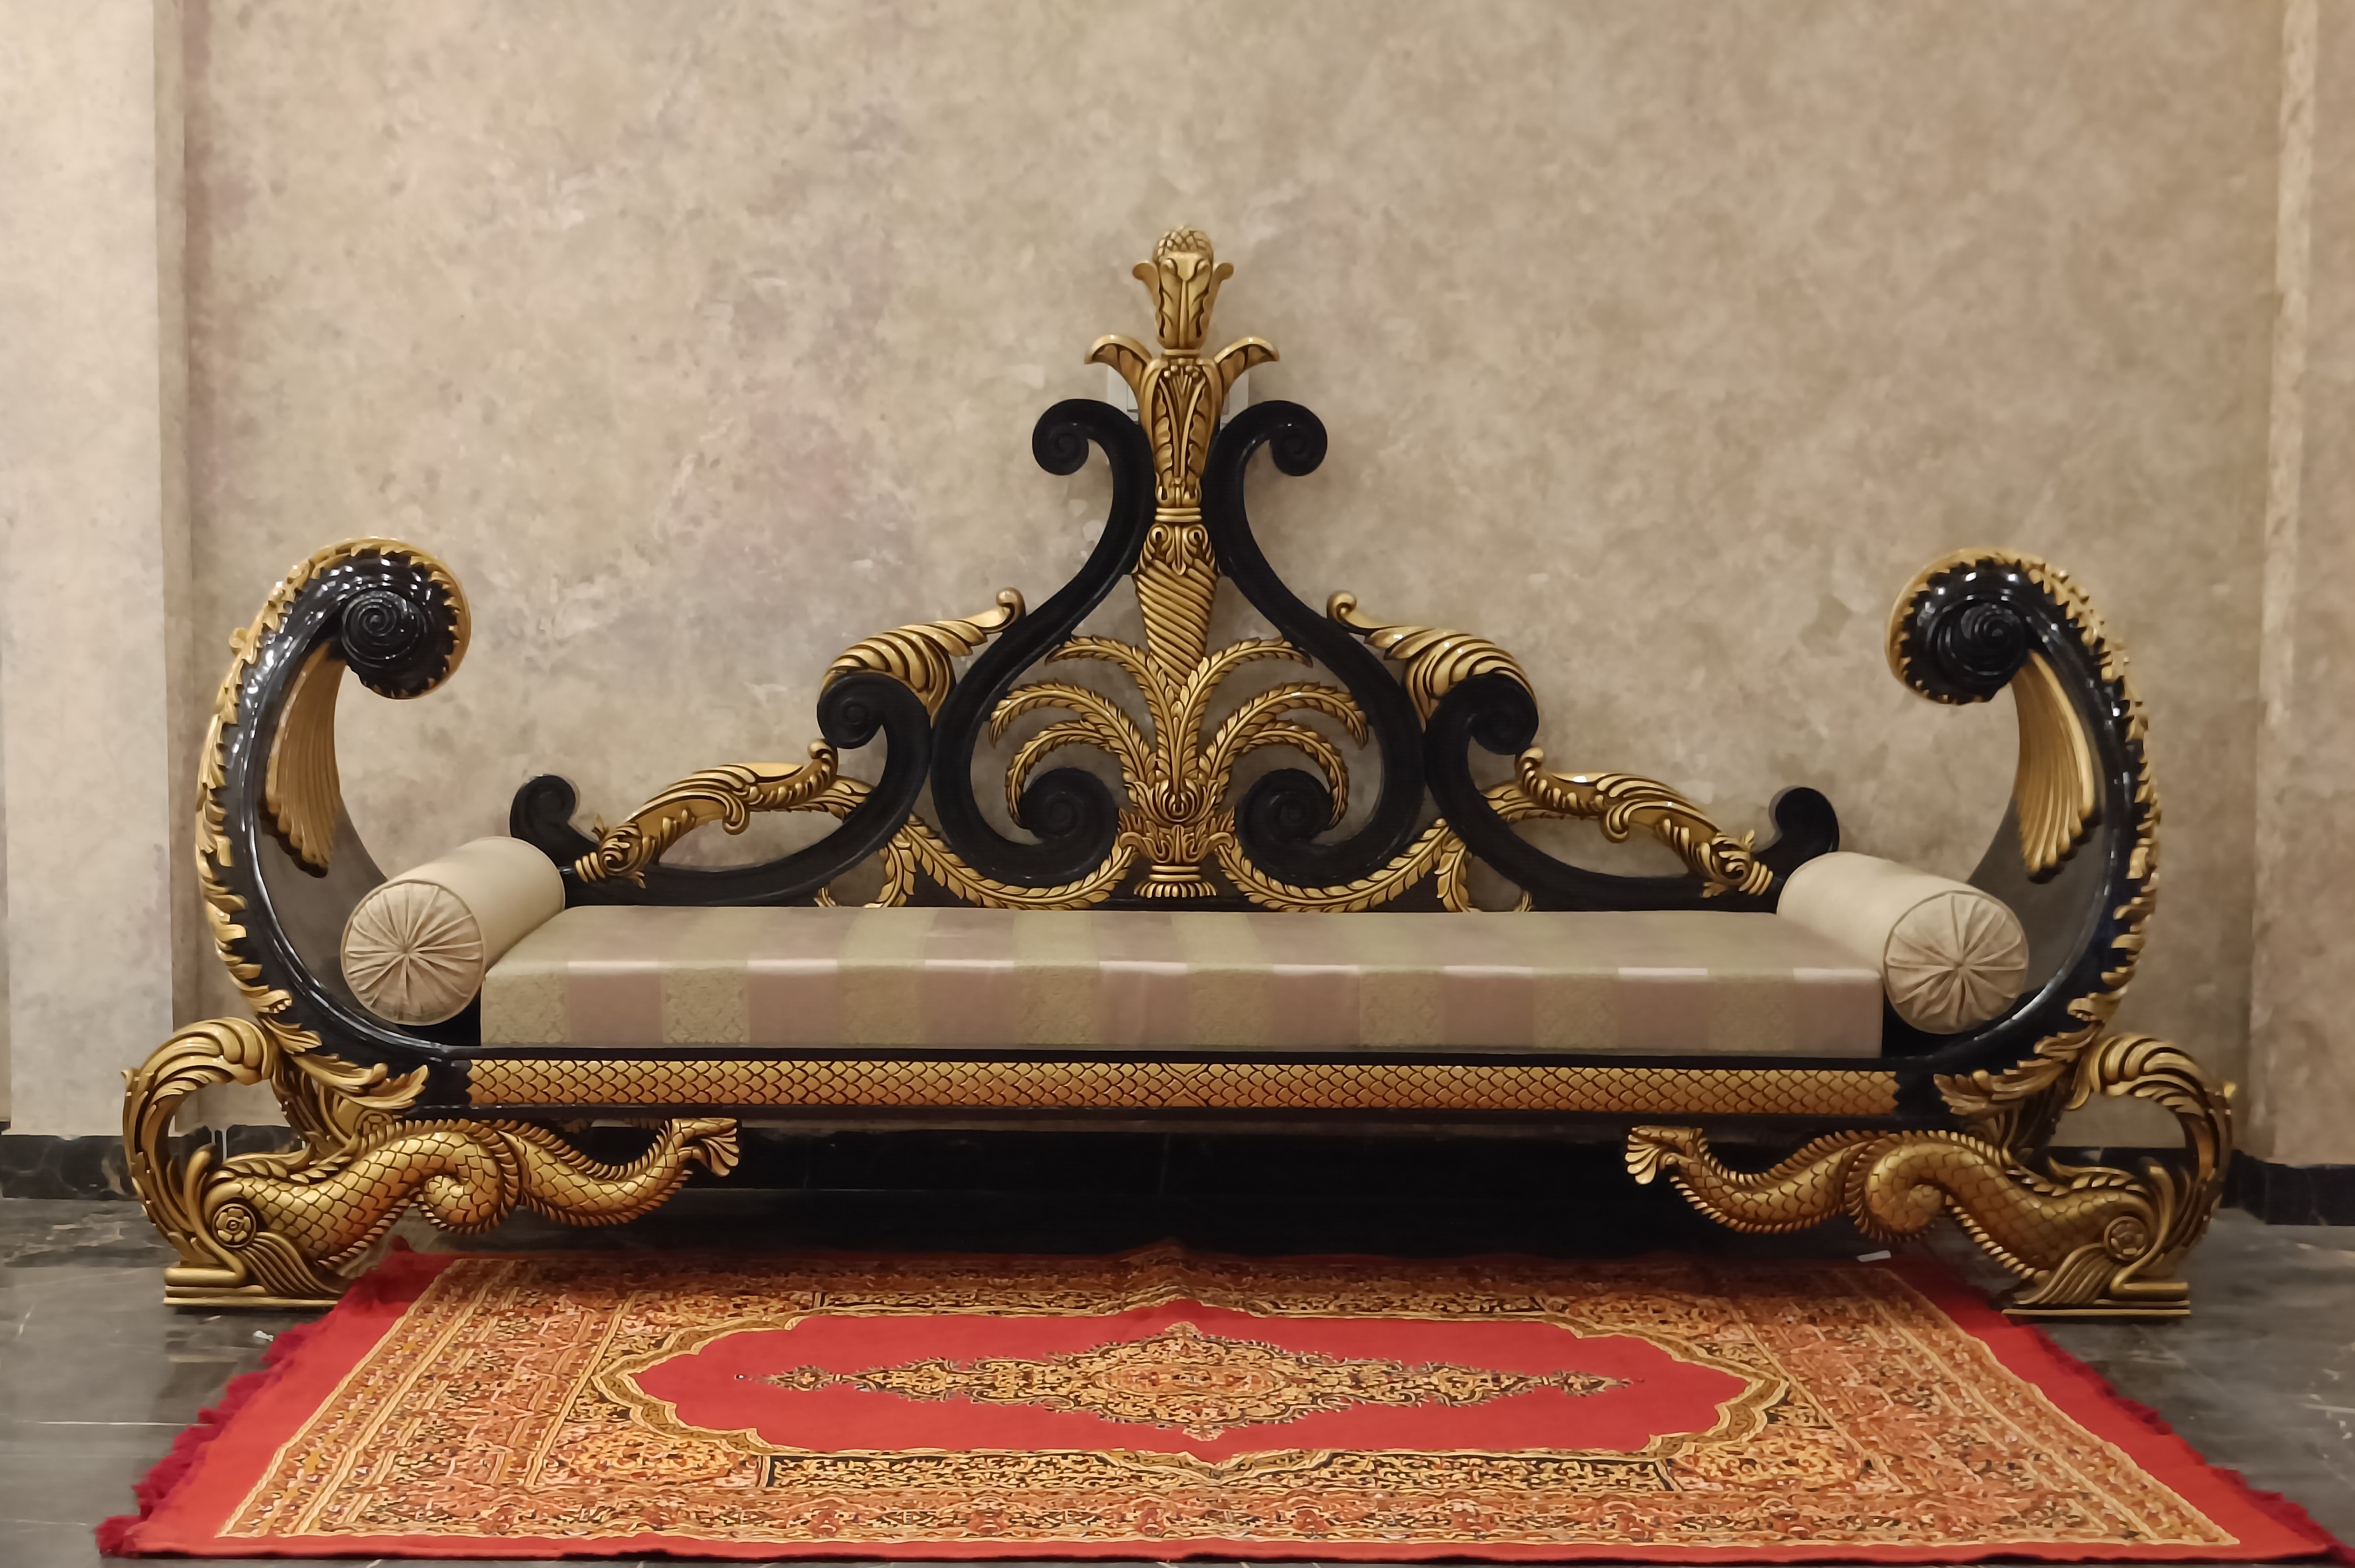 maharaja sofa in teak wood artistic wood carving in royal golden color - luxurious fabric and very comfortable upholstery - adorned with majestic crown - carved by Royalzig luxury furniture  